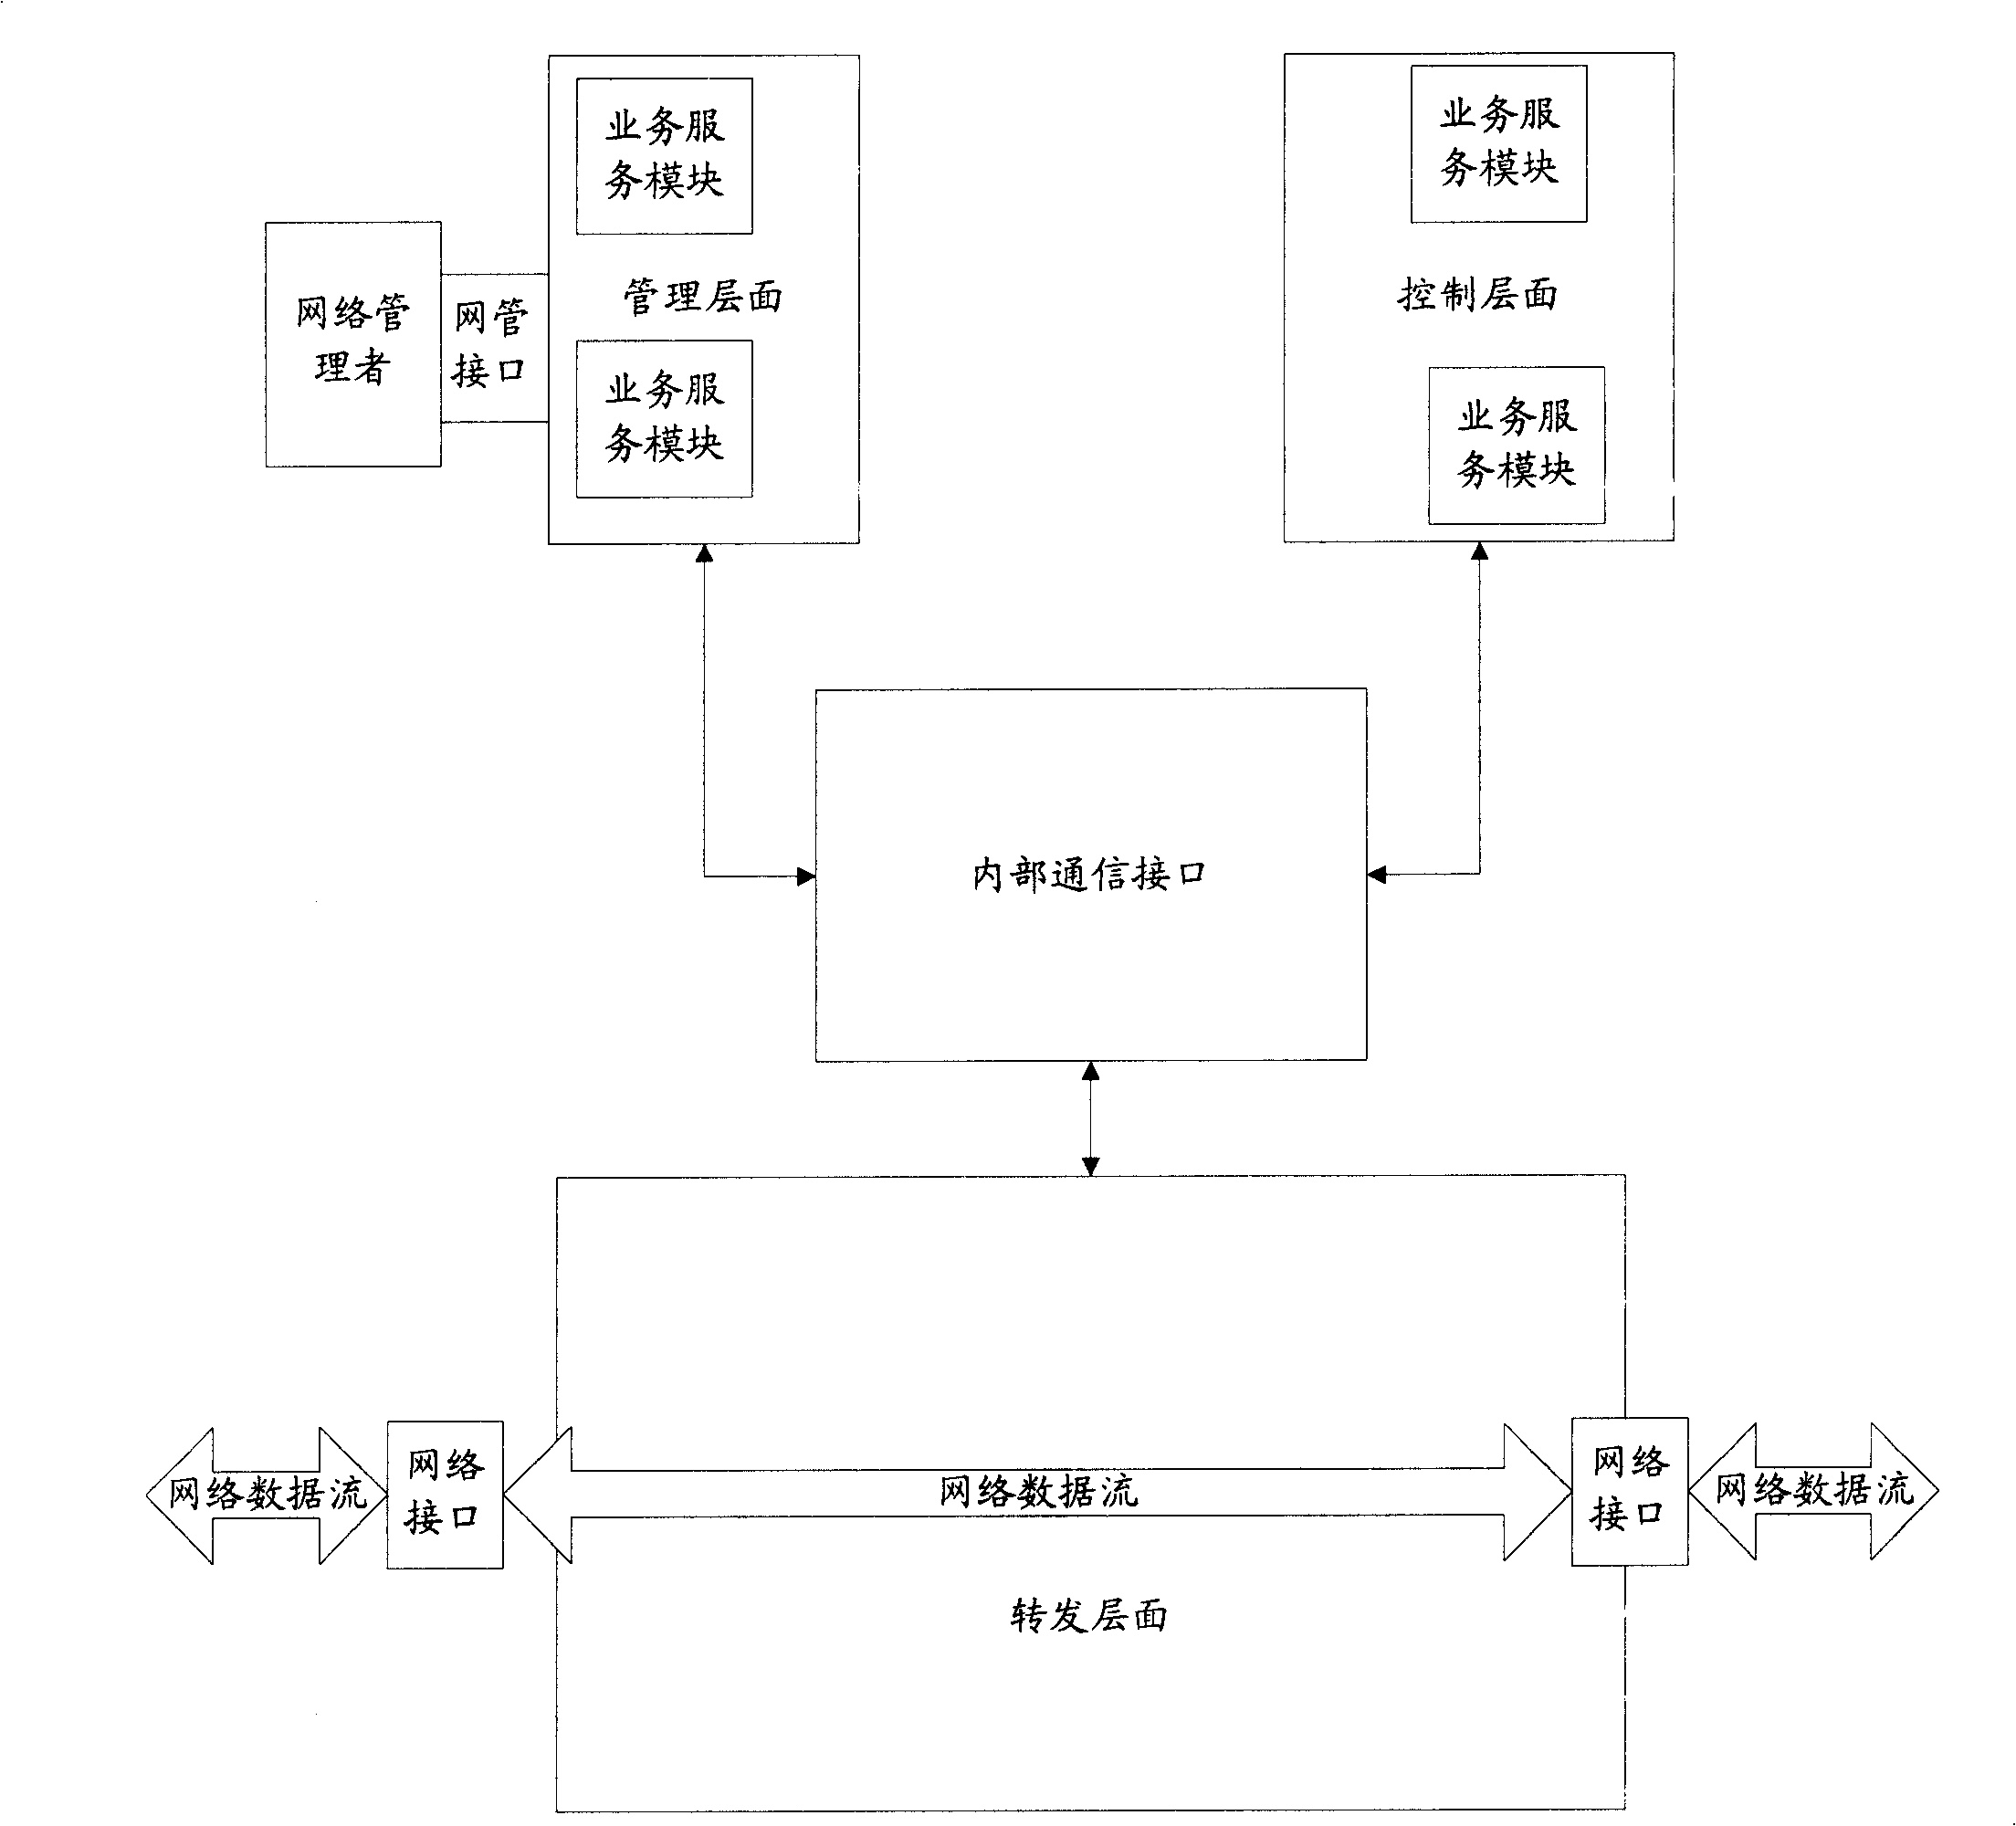 Method and apparatus for defending network attack